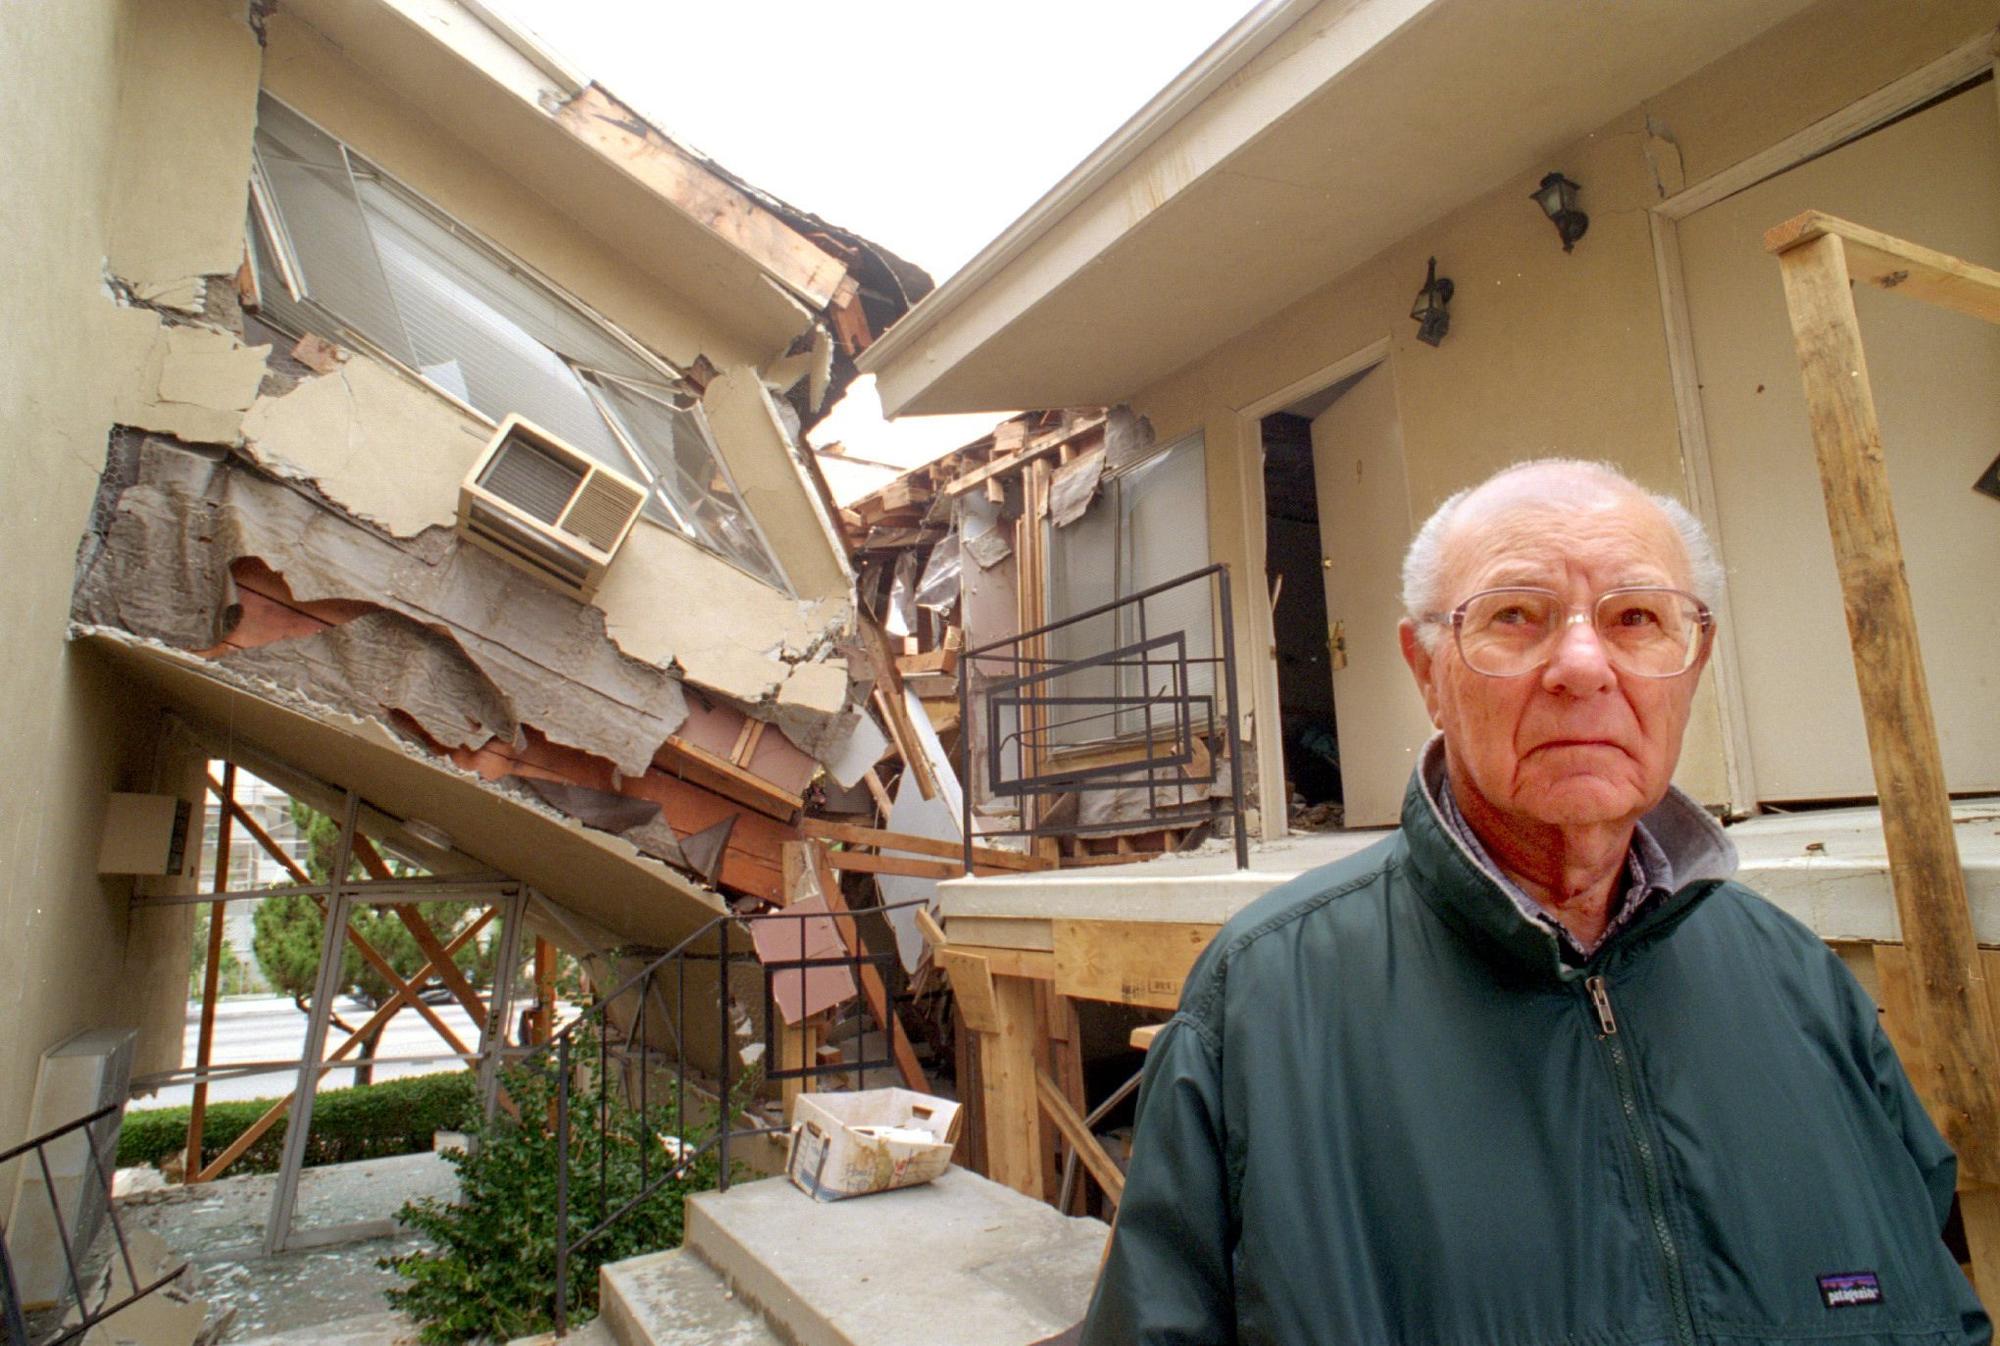 After the 1994 Northridge earthquake, Kenneth Shaffer, with one of his Sherman Oaks buildings, says he lost nearly a quarter of the units he had accumulated over a lifetime of investment.